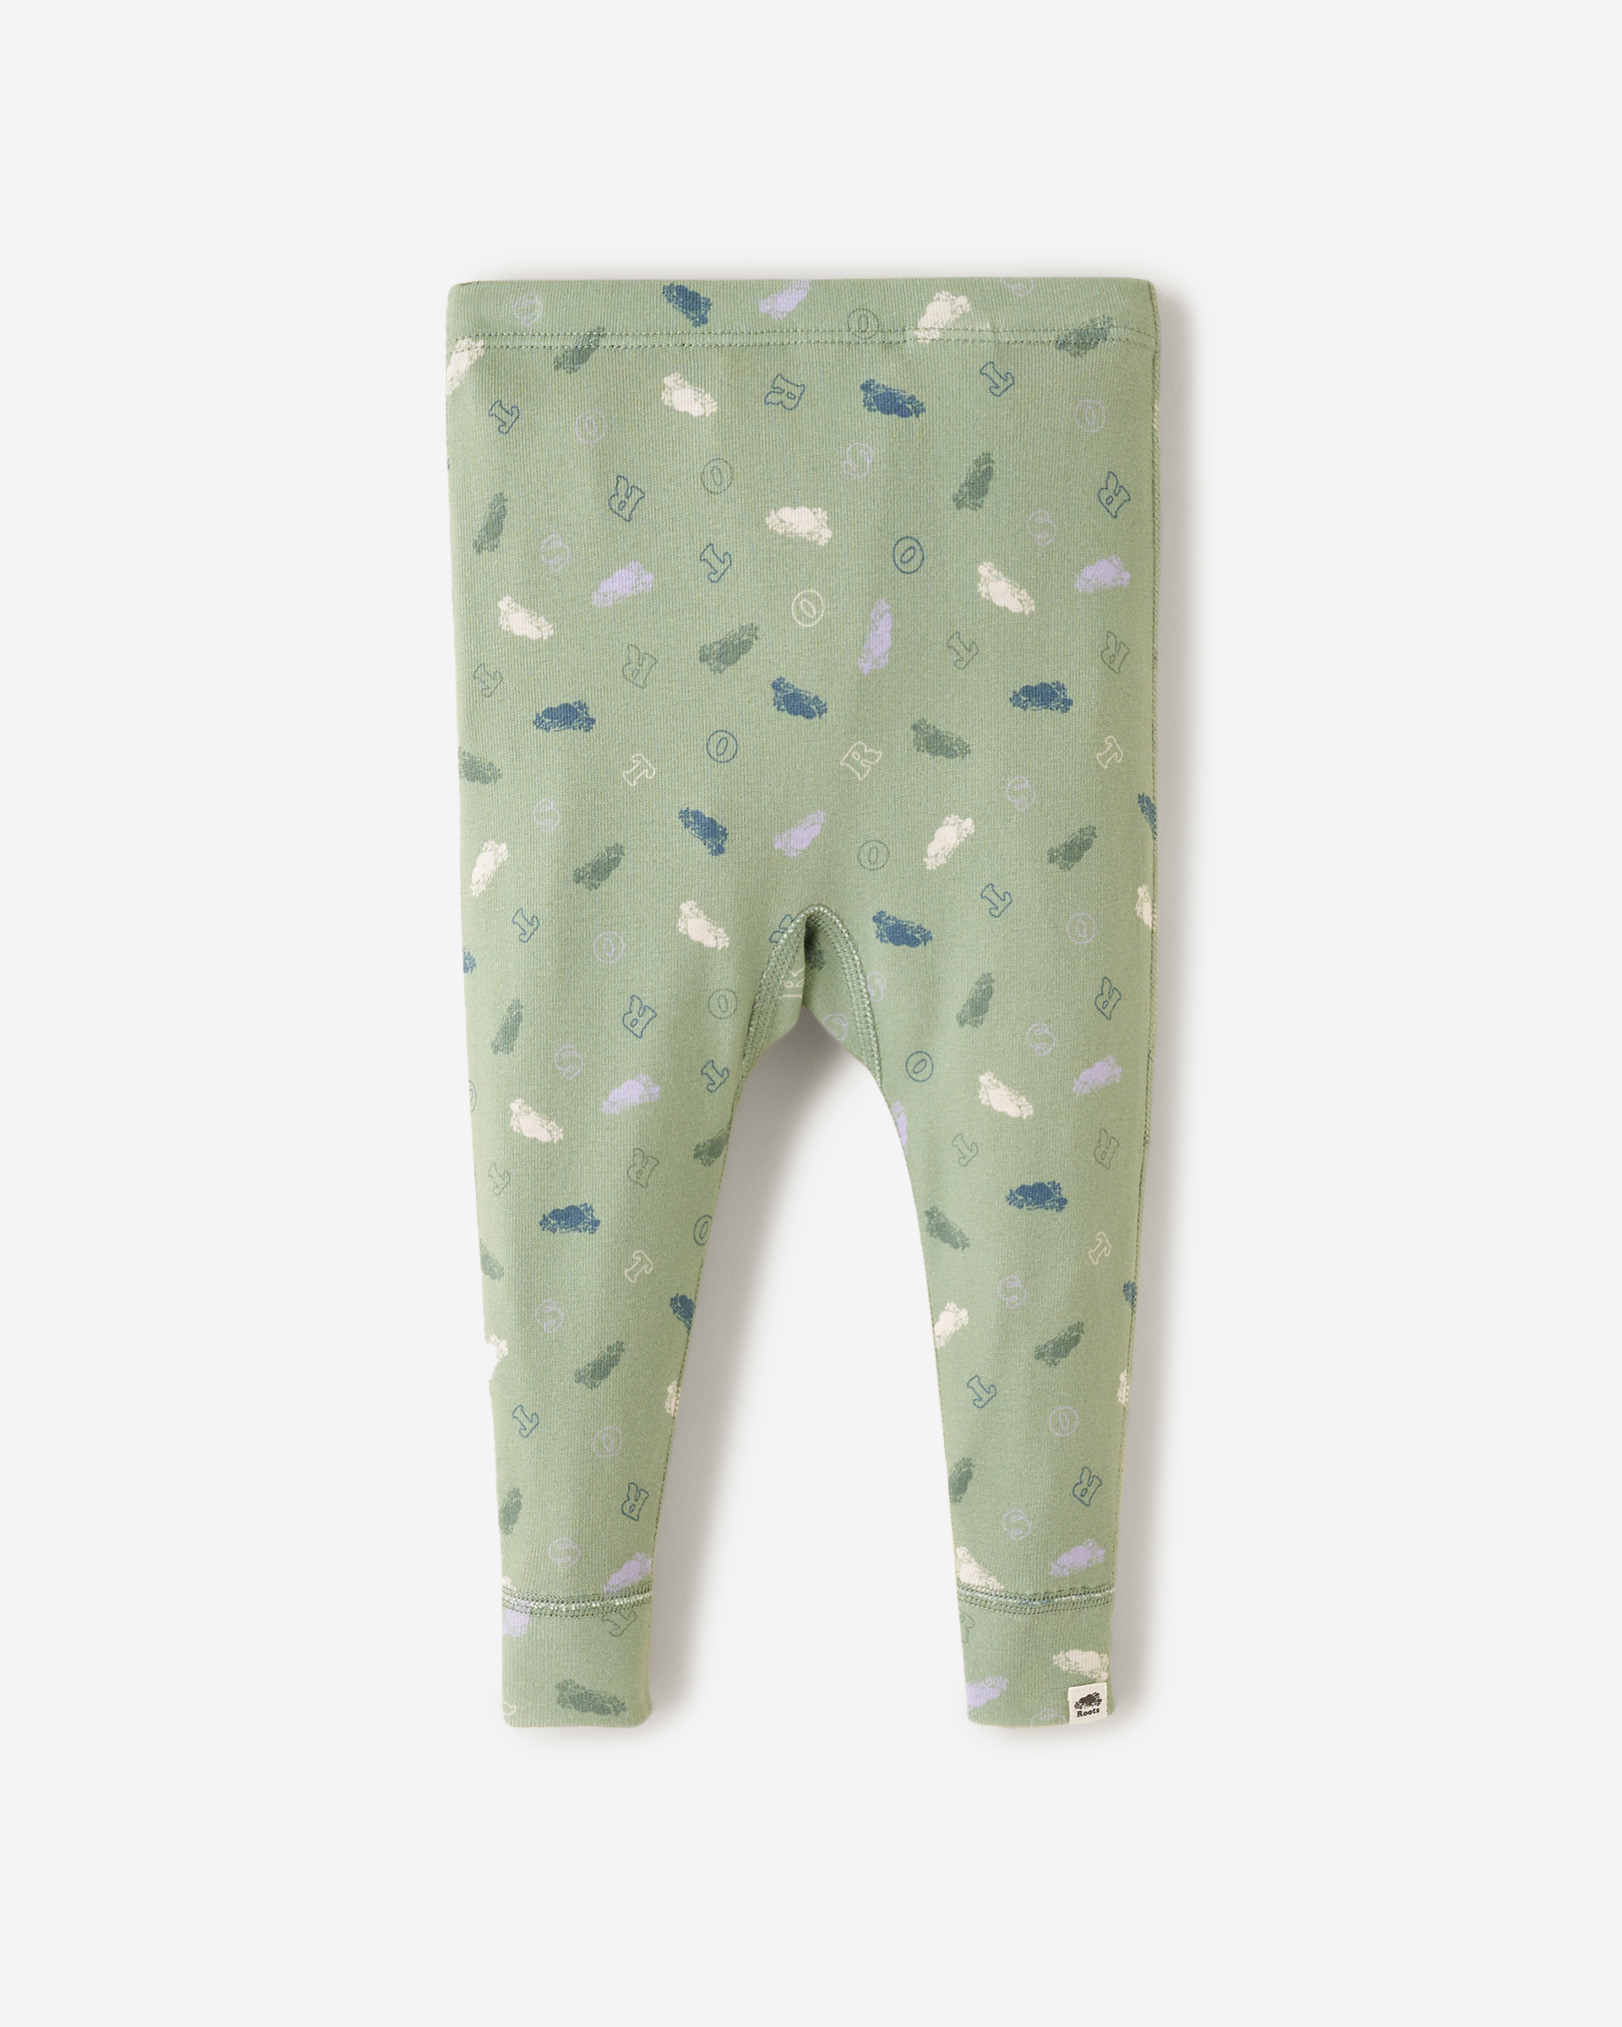 Roots Baby's First Pant in Cactus Green